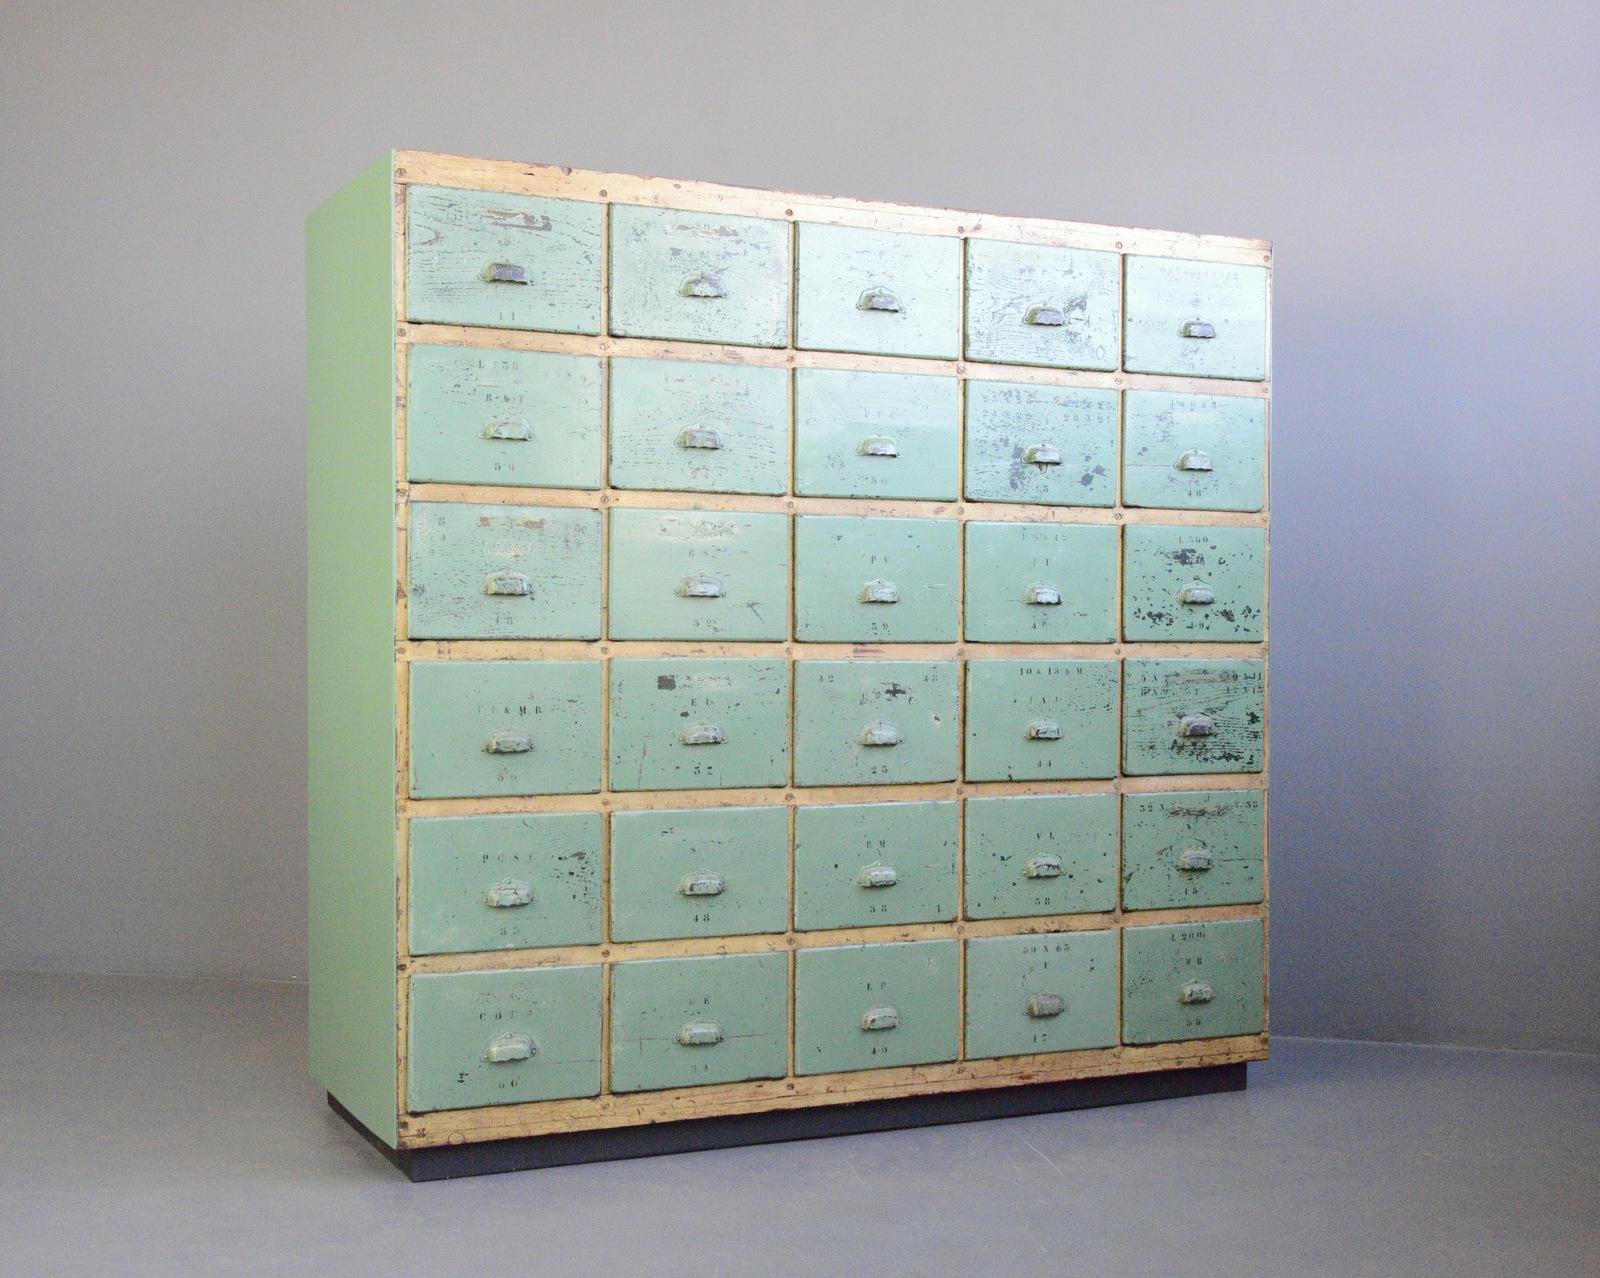 French painted workshop drawers Circa 1930s

- Solid oak drawer fronts
- Solid pine sides and frame
- Original steel cup handles
- 30 large drawers
- Drawers have their original metal rollers
- French ~ 1930s
- 173cm wide x 65cm deep x 166cm